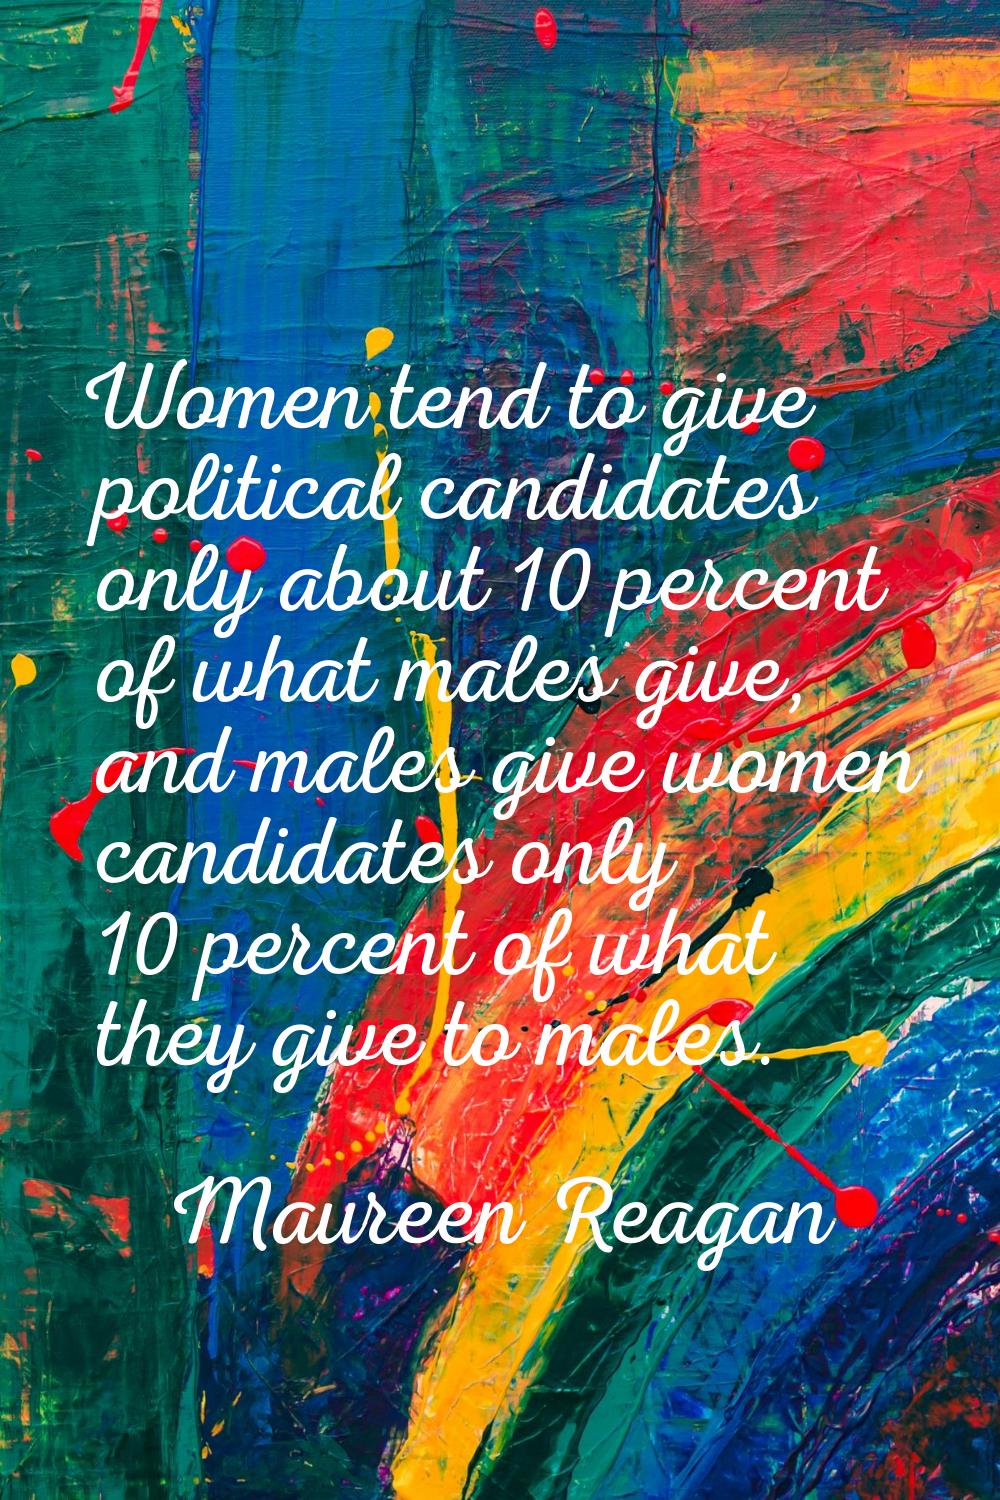 Women tend to give political candidates only about 10 percent of what males give, and males give wo